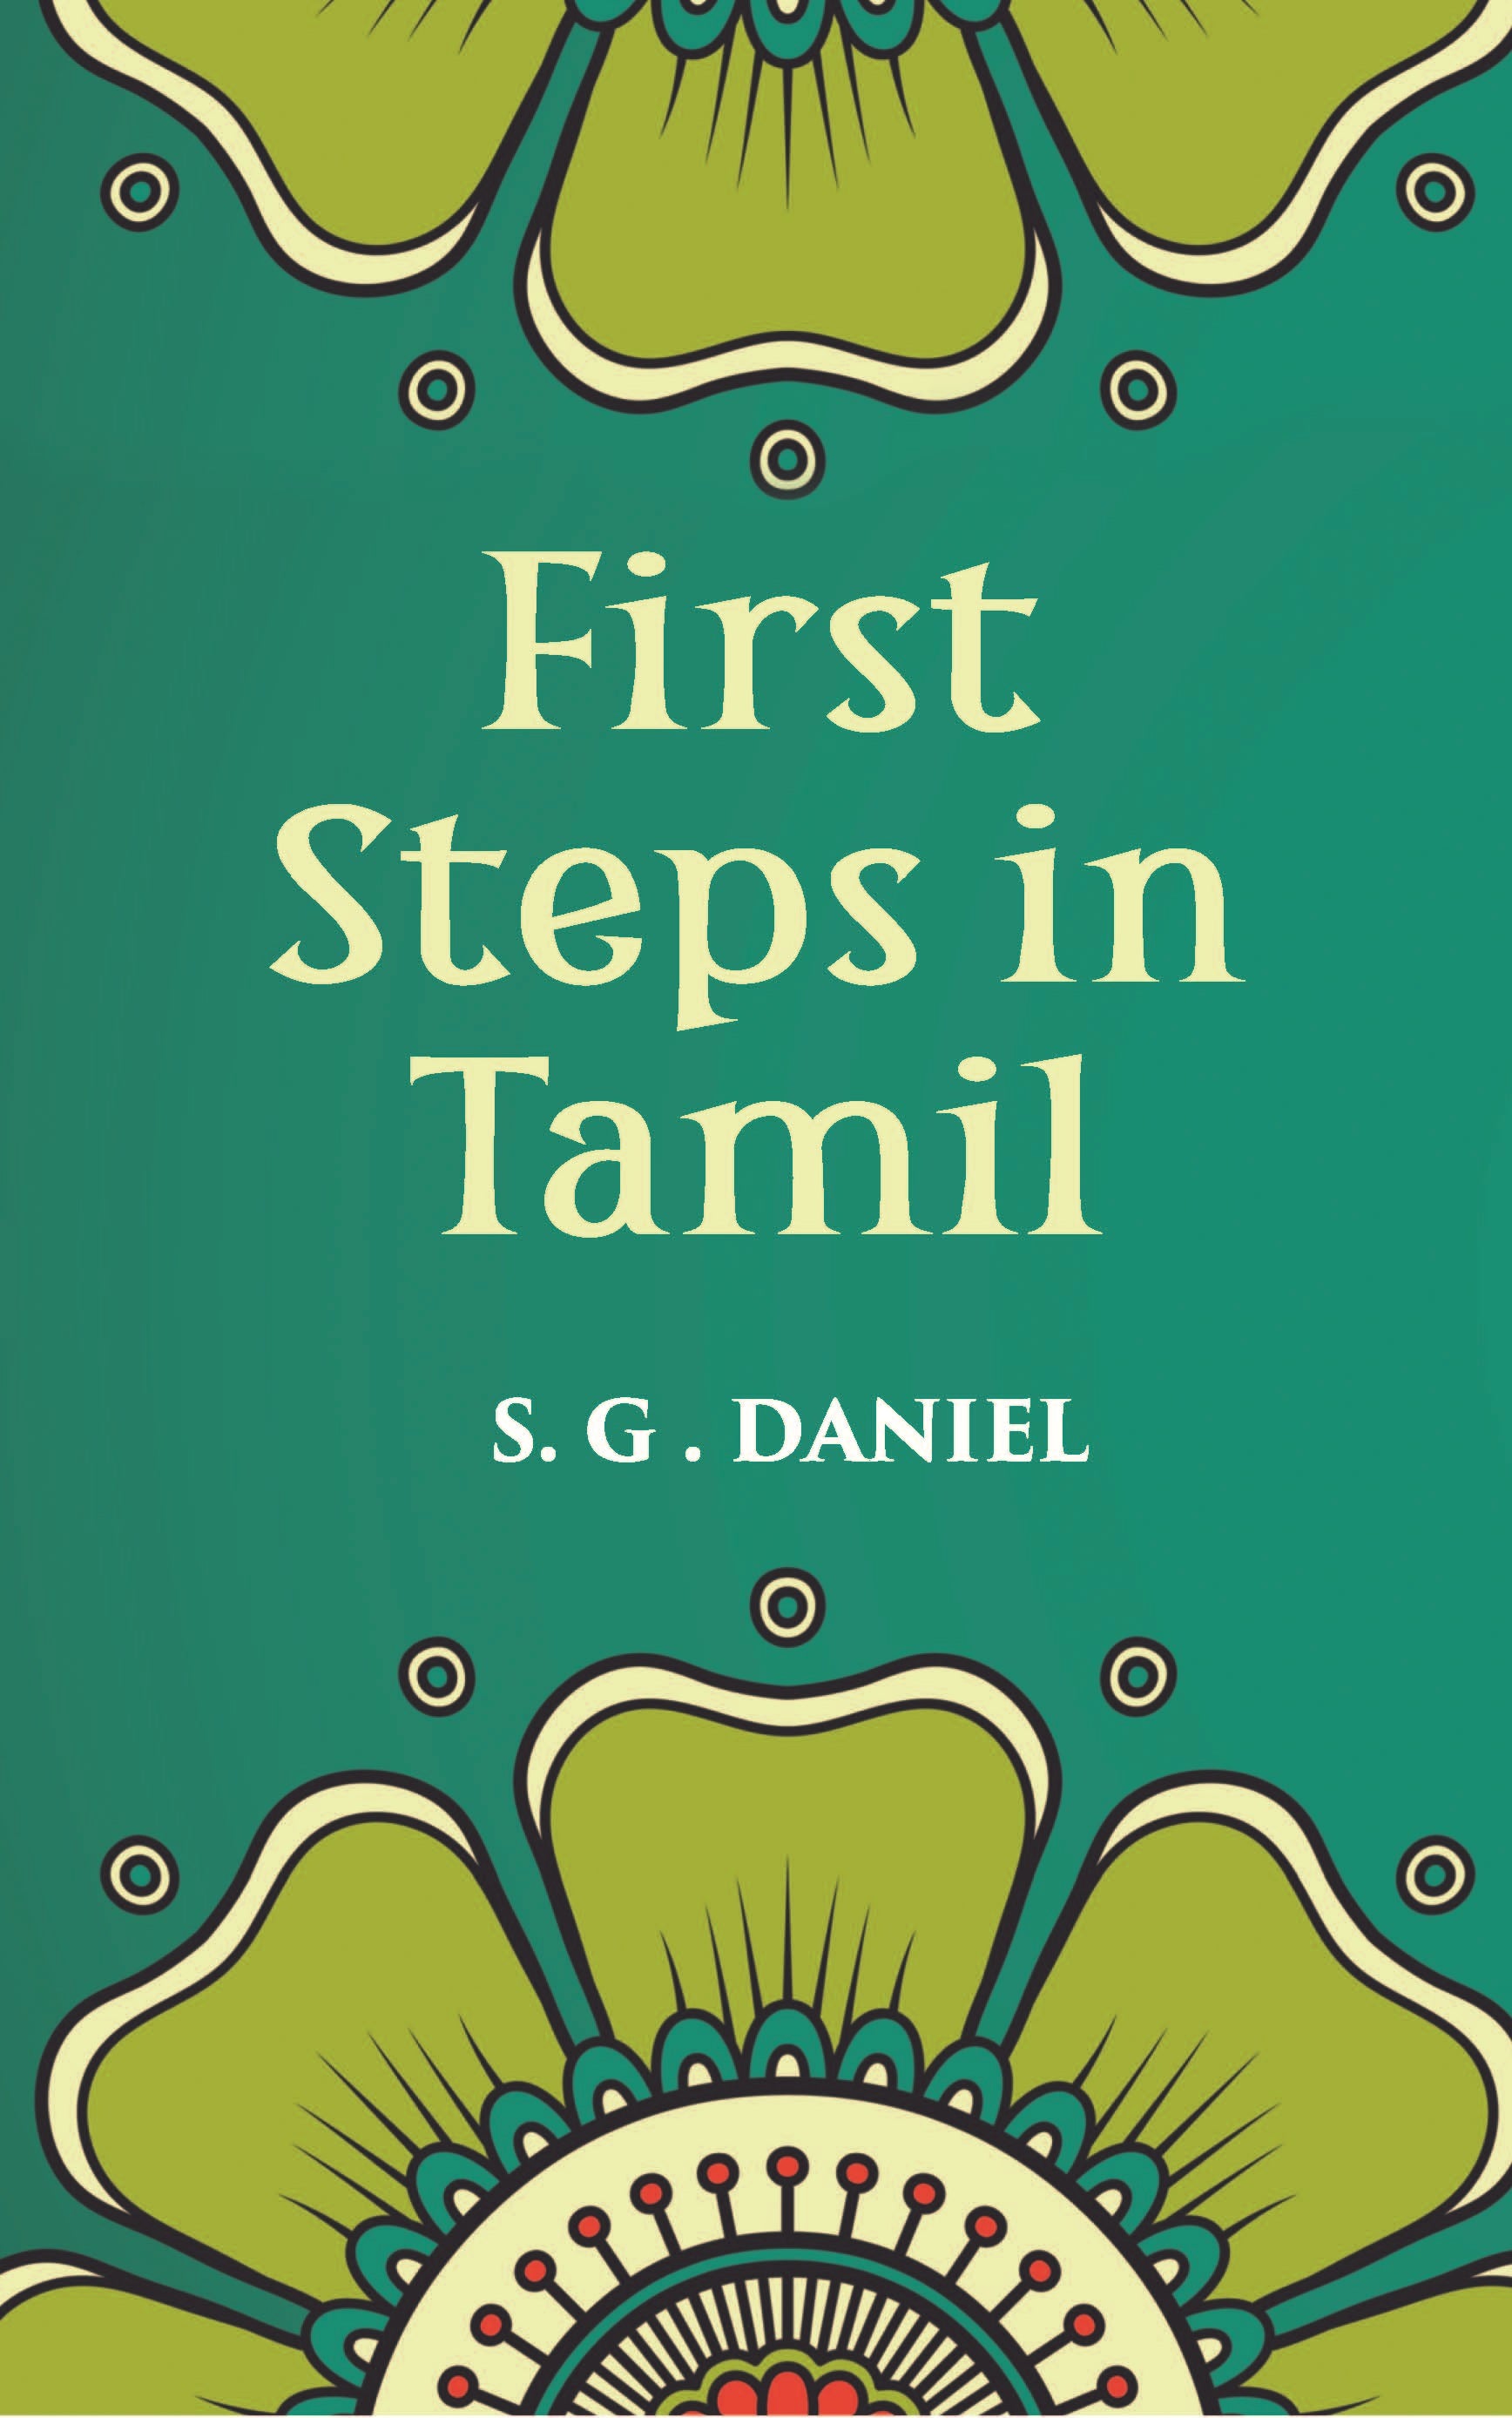 First Steps in Tamil